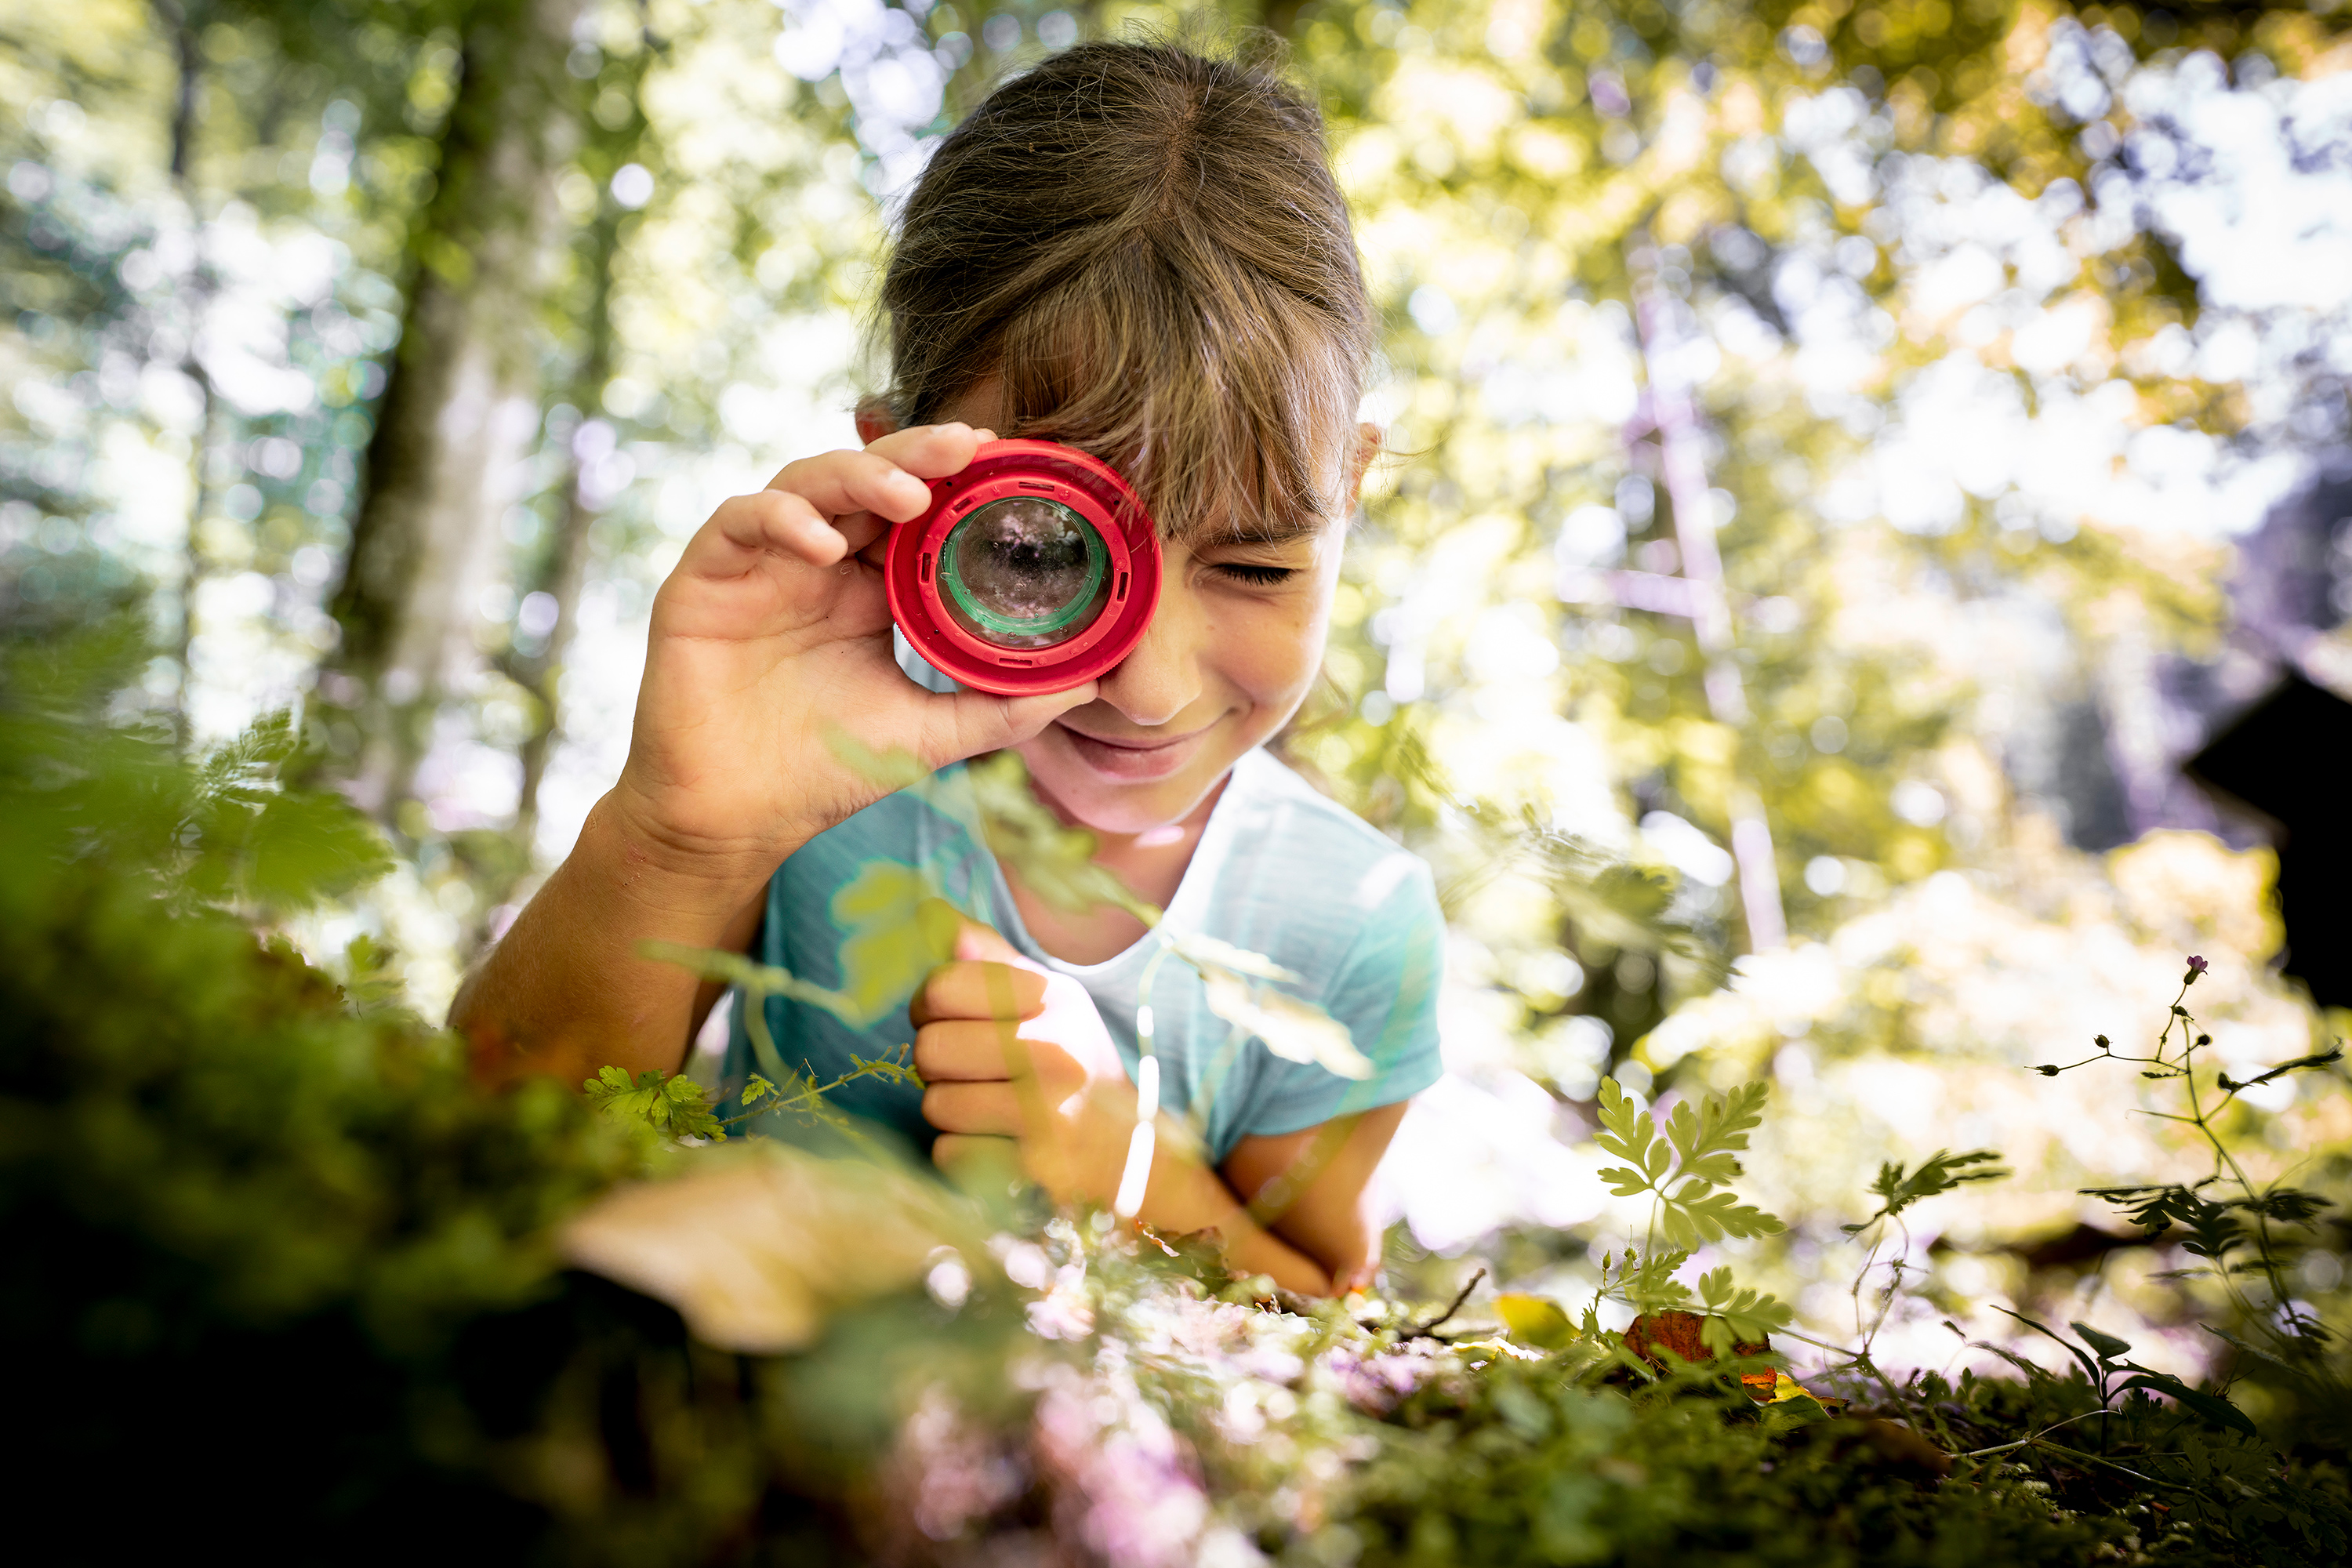 A girl observes the forest floor through a magnifying glass